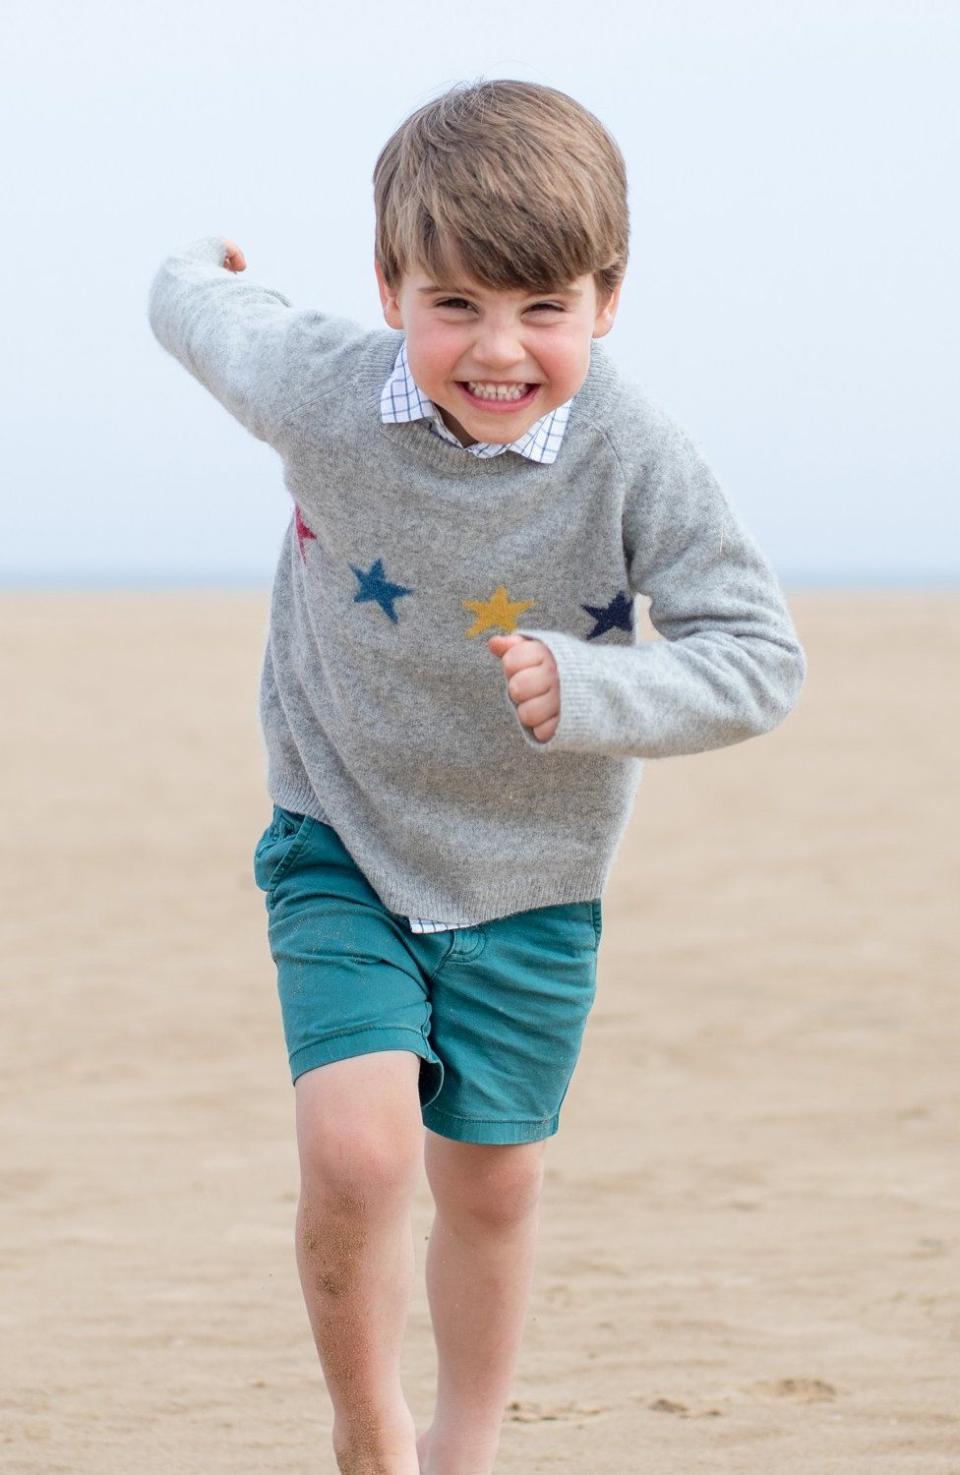 The royal birthday boy's jumper was from Olivier London's 2017 collection. (The Duchess of Cambridge)